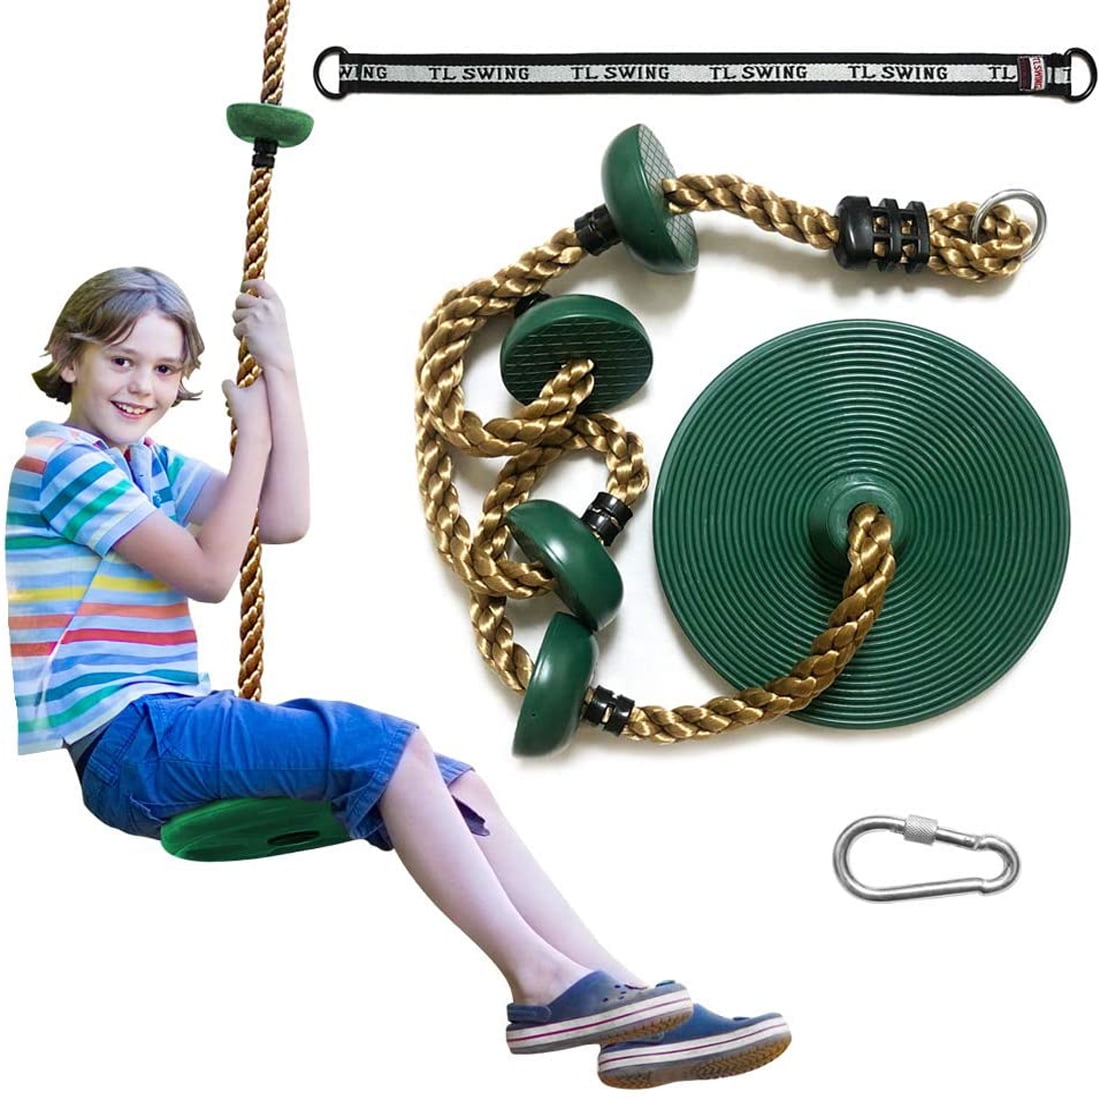 Red Disc Tree Swing Seat 6.5ft Tree Climbing Rope and Kids Swing: Climbing Rope for Kids with Foot Hold Platforms and Hanging Kit with Tree Strap Outdoor Swings and Swing Set Accessories Rope Swing 